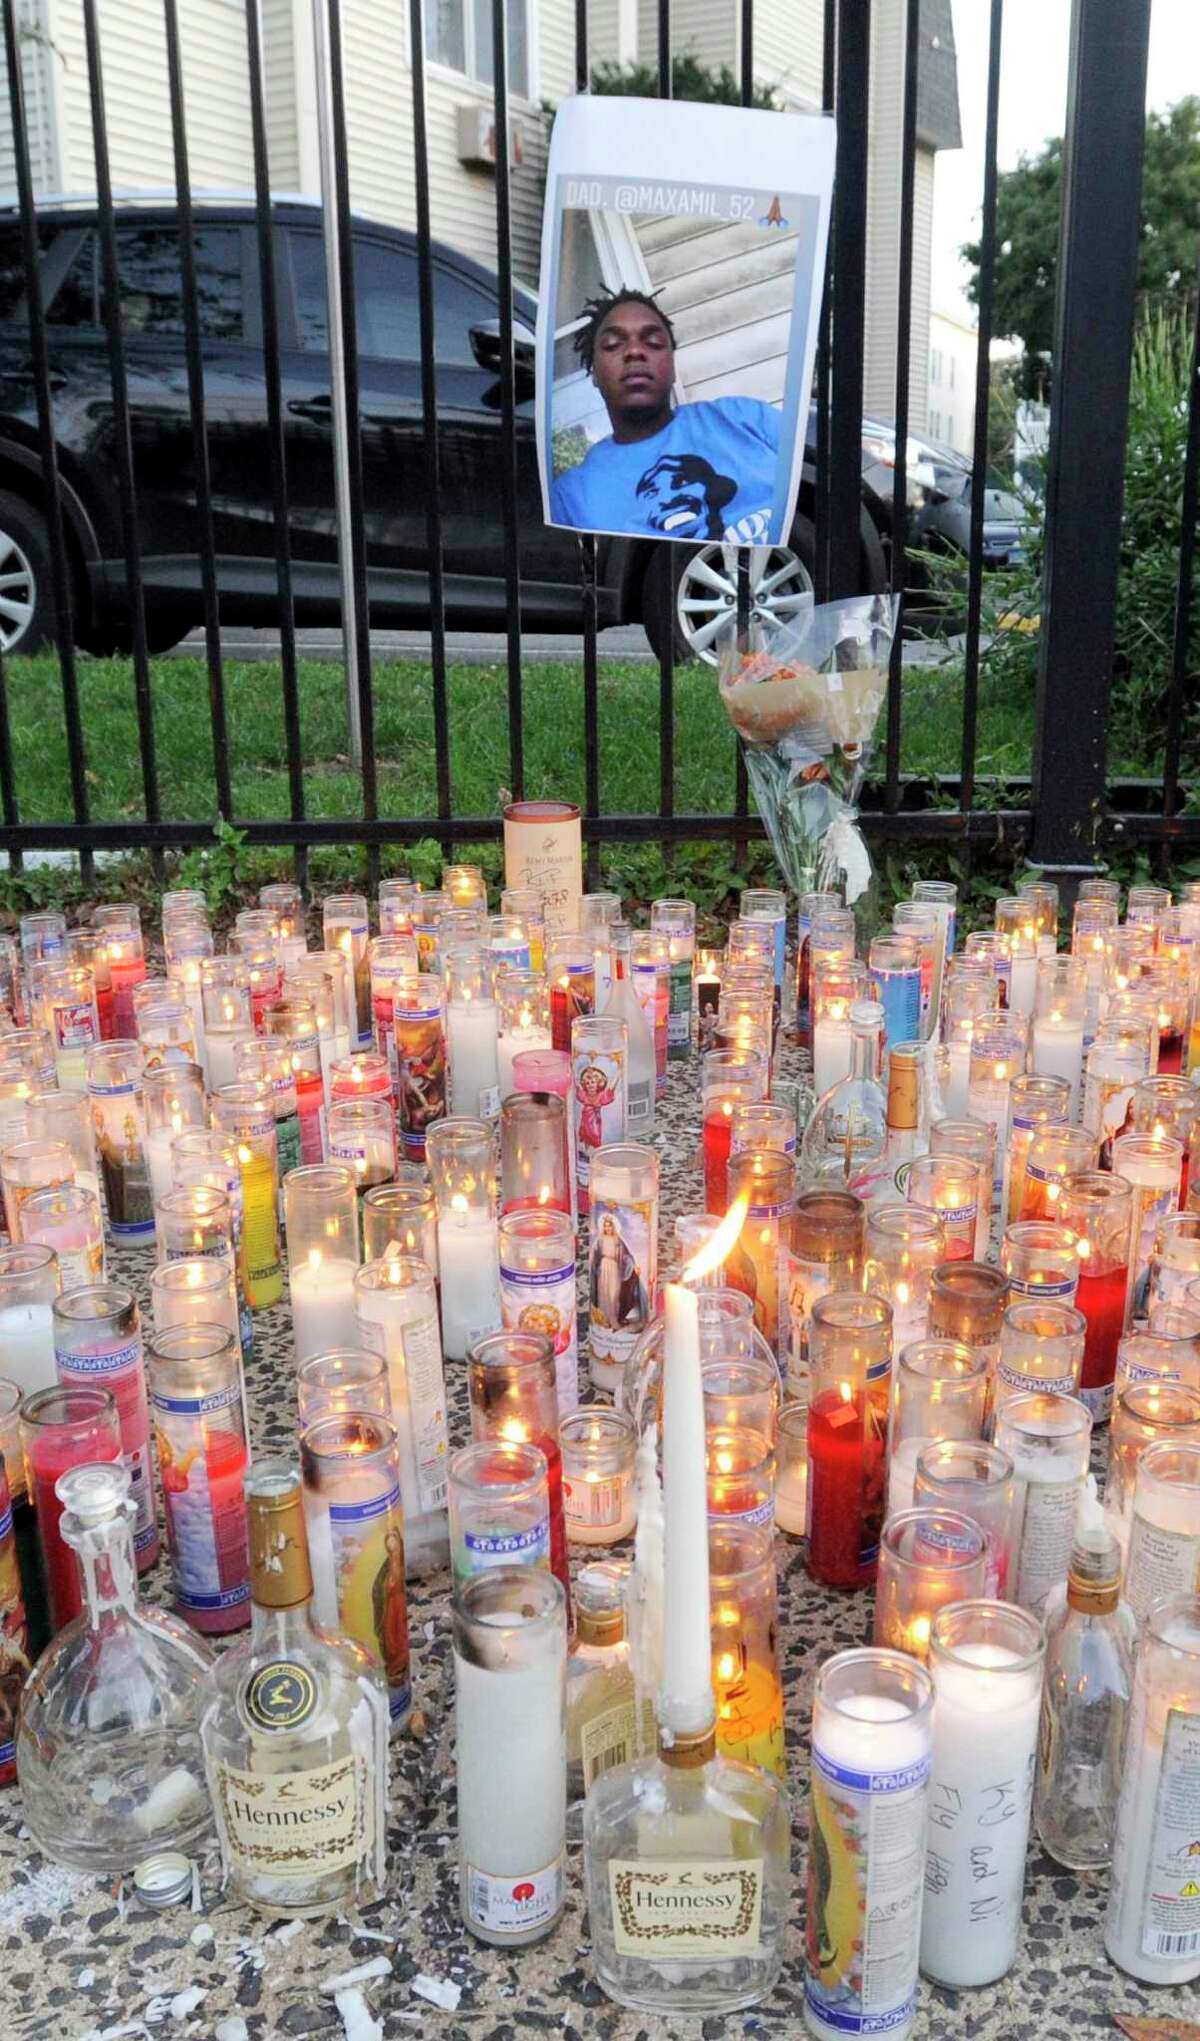 Candles are placed in front of a picture of Ky-Mani Antoine-Pollack during a vigil held in his remembrance on Ludlow Street in Stamford, Connecticut on August 27, 2019.